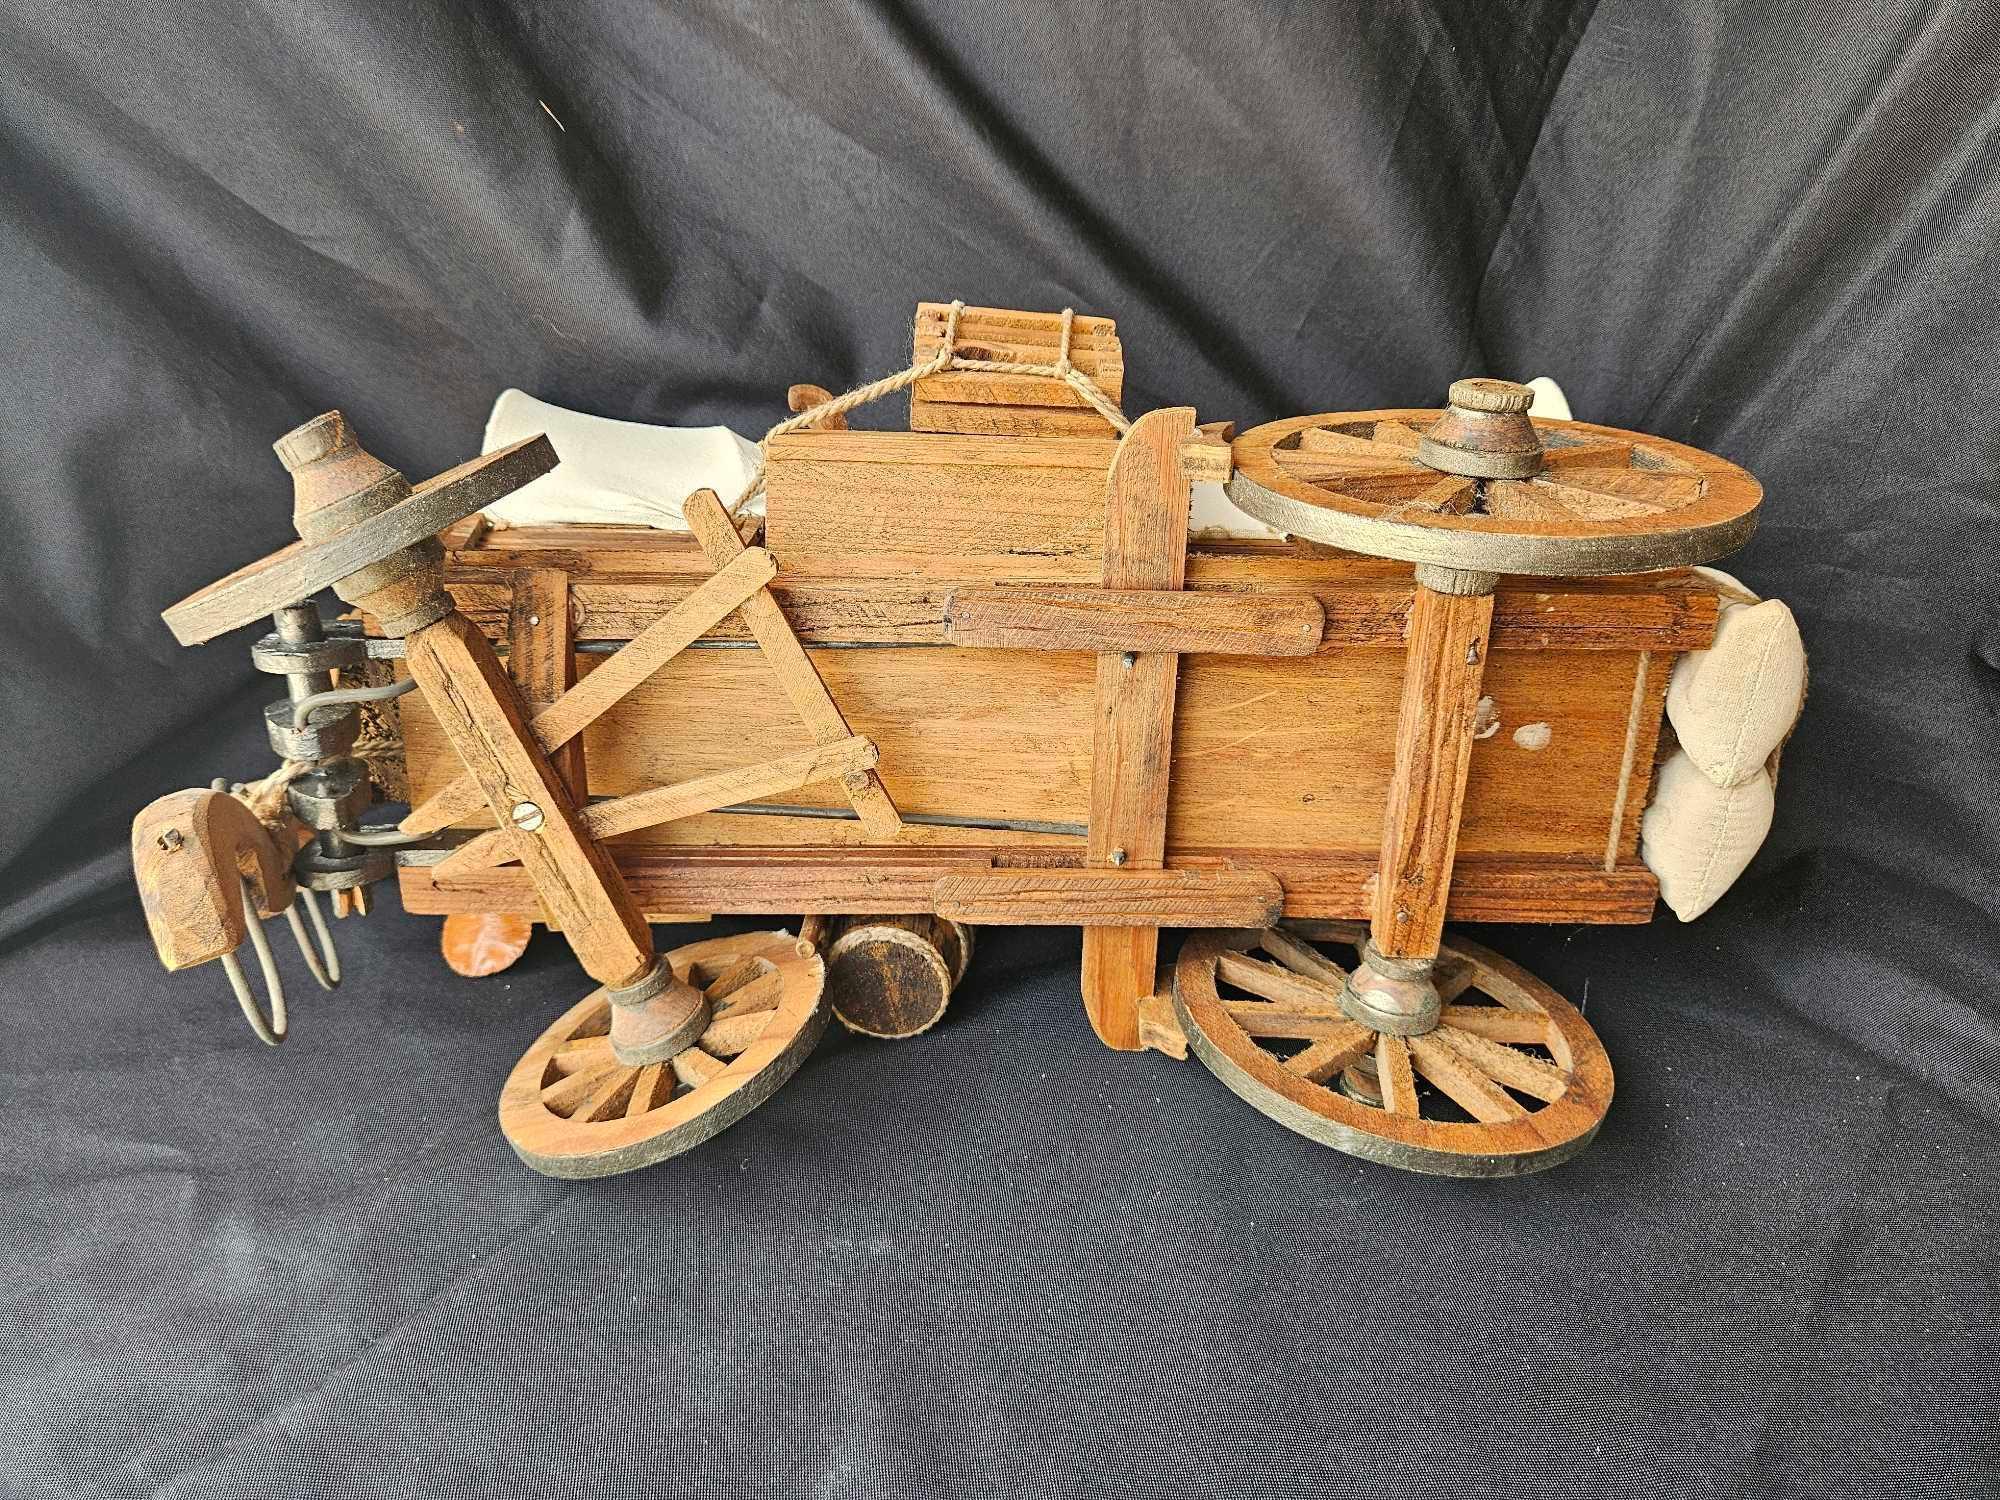 Vintage Covered Wagon 21" Wooden Replica